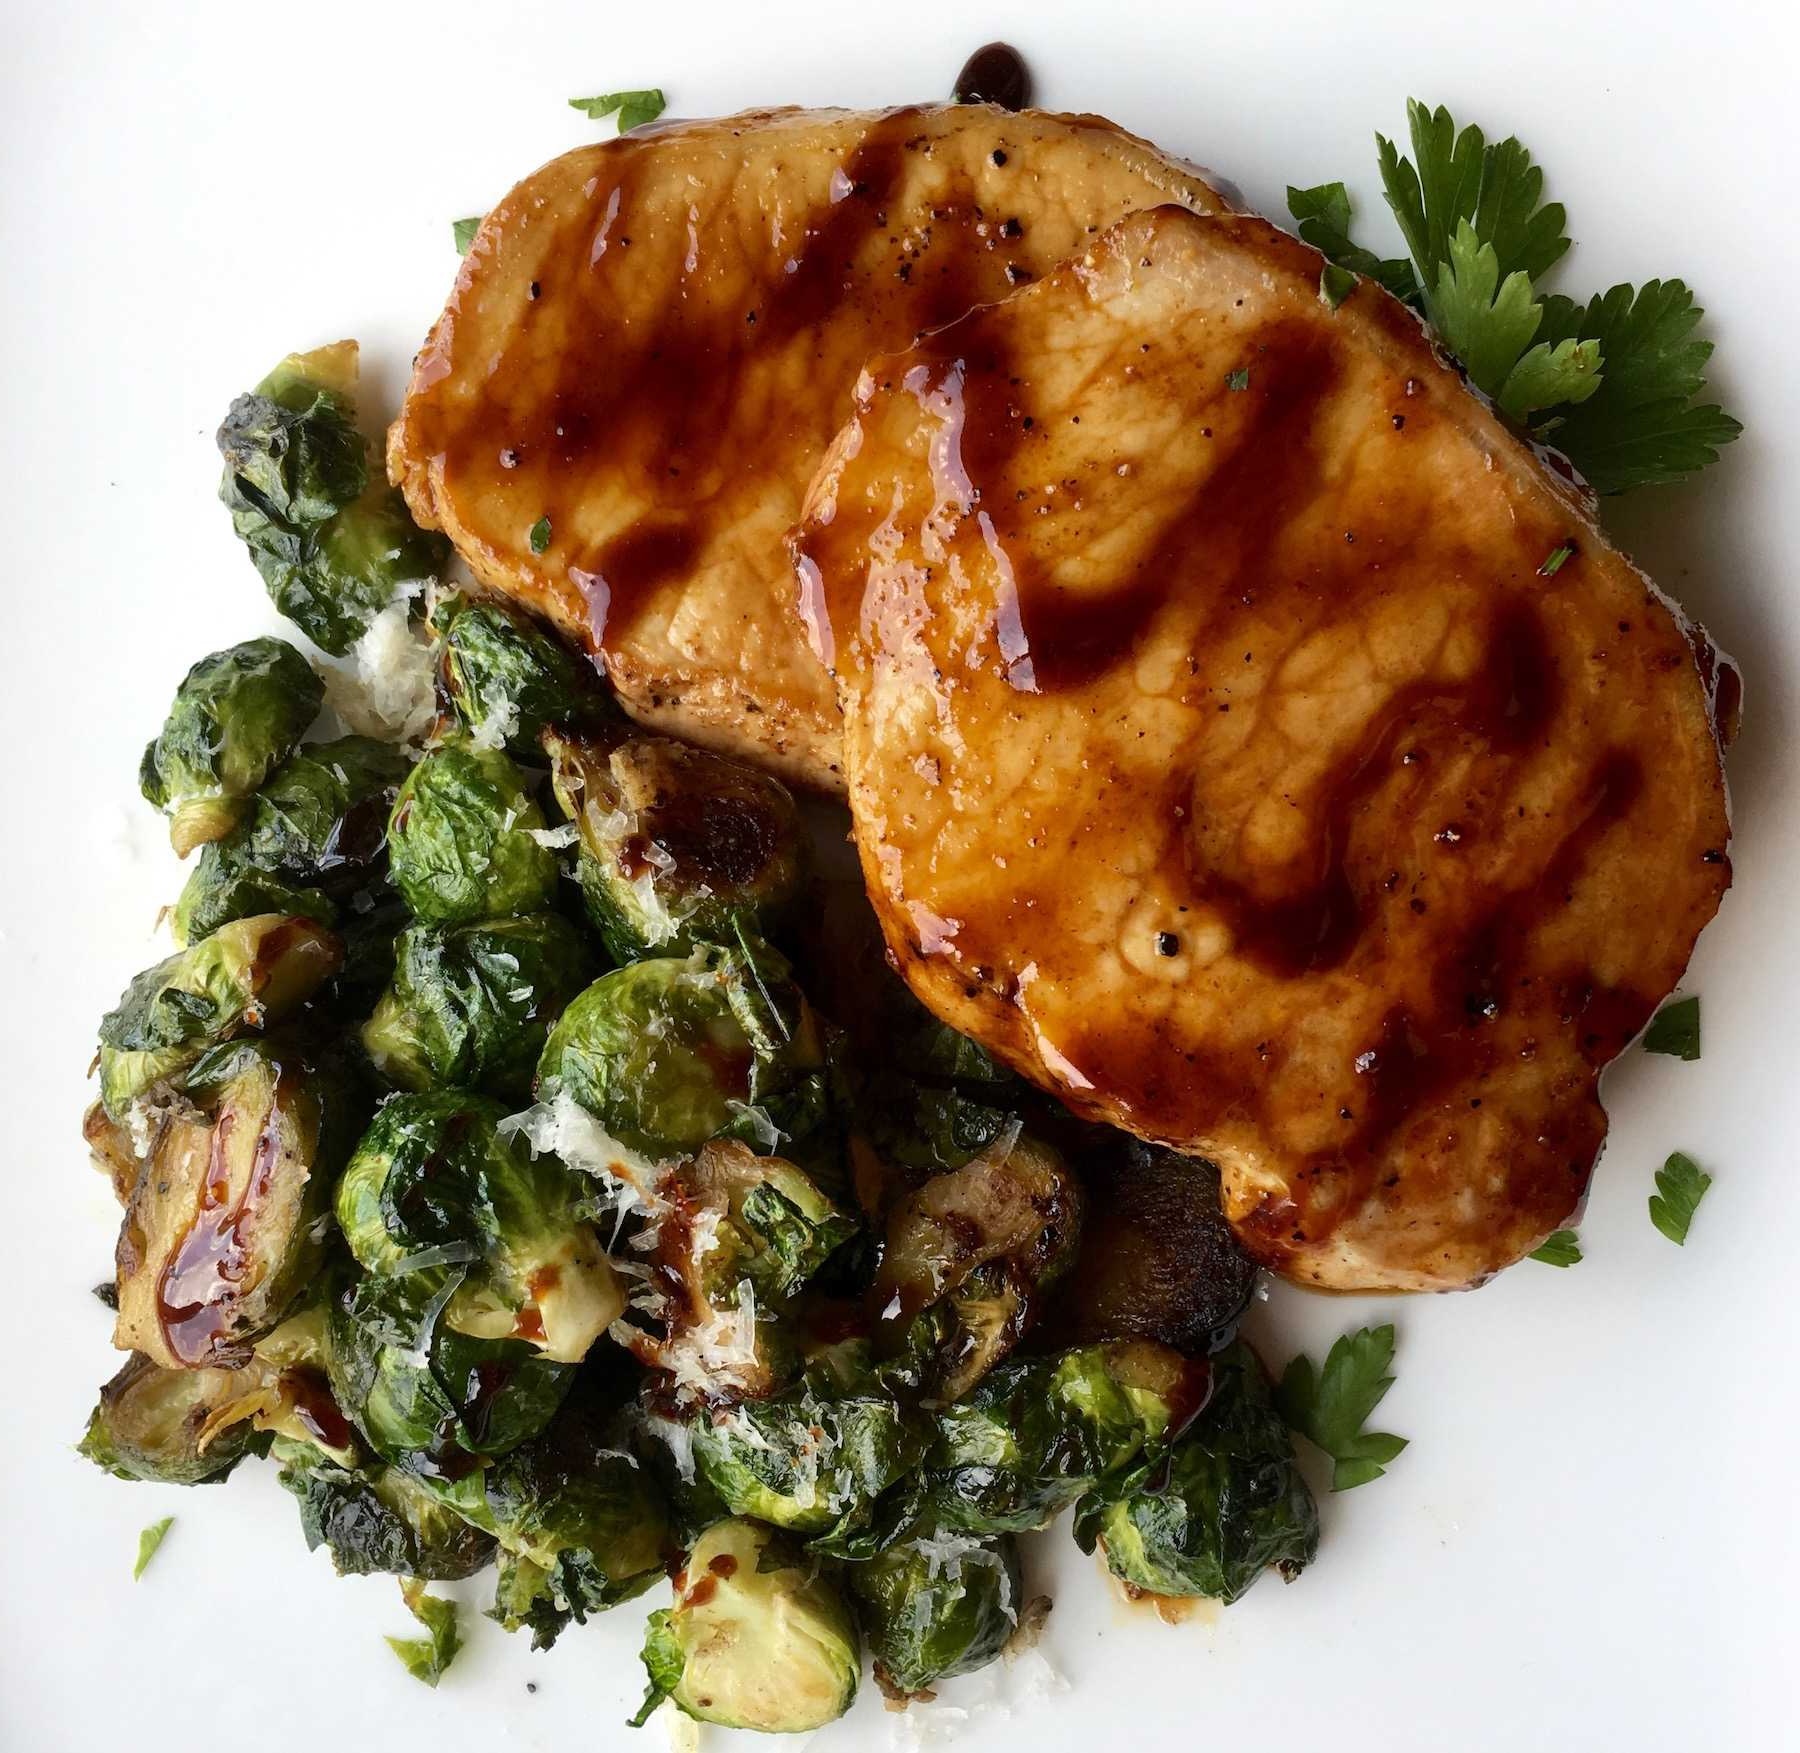  Maple Glazed Pork Chops with Roasted Brussels Sprouts.jpeg